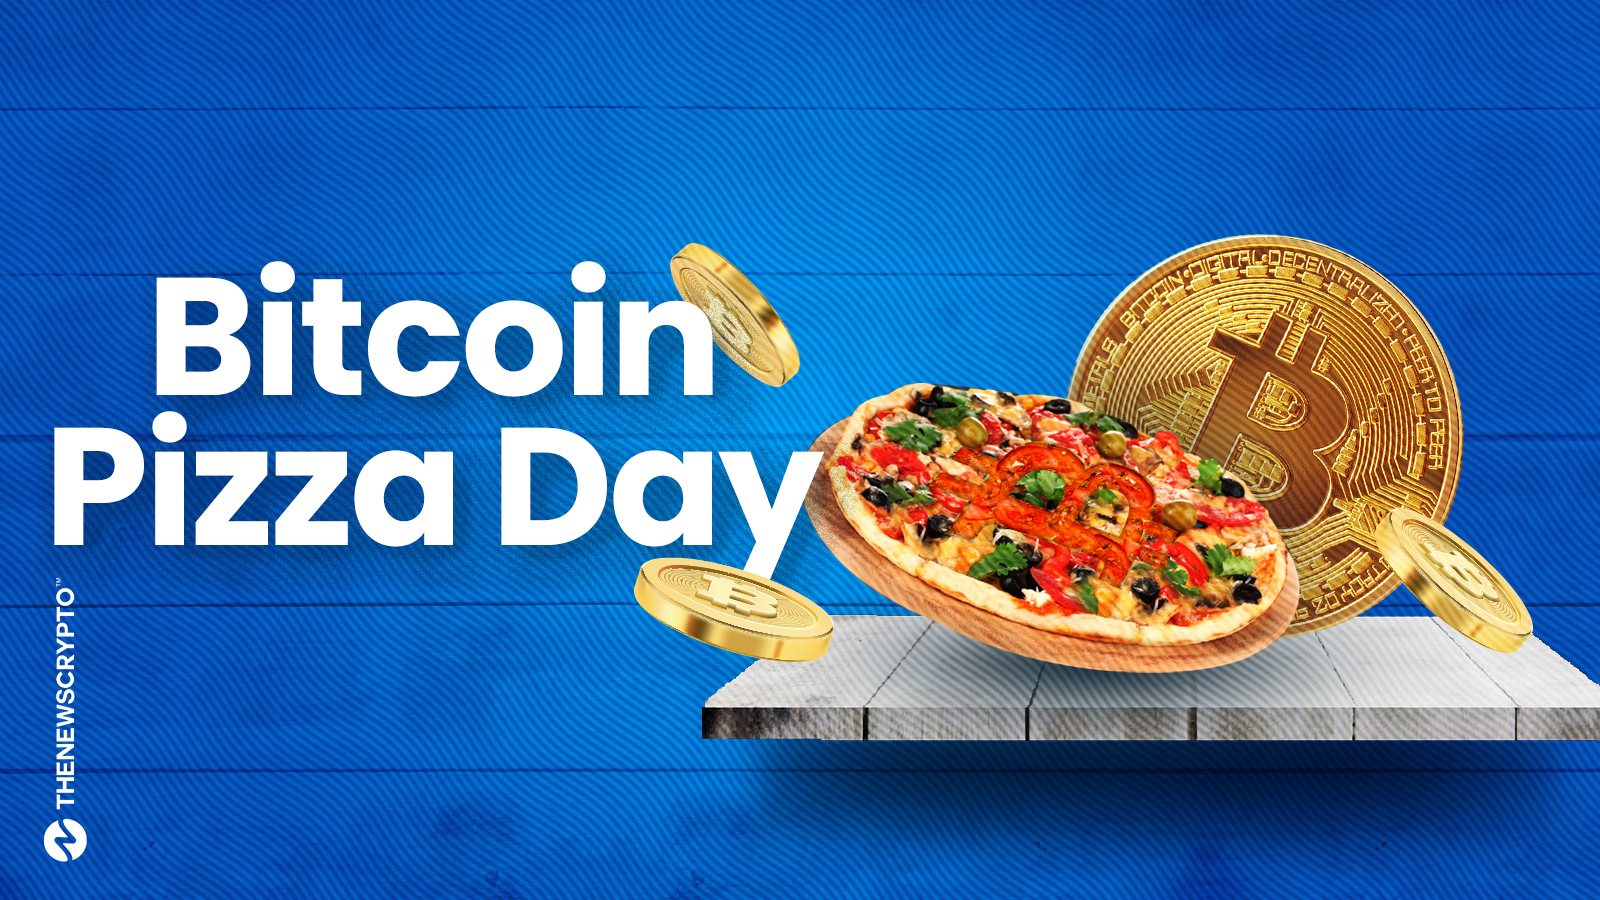 Papa John's Explains Why It's Giving Away 10k Slices on Bitcoin Pizza Day